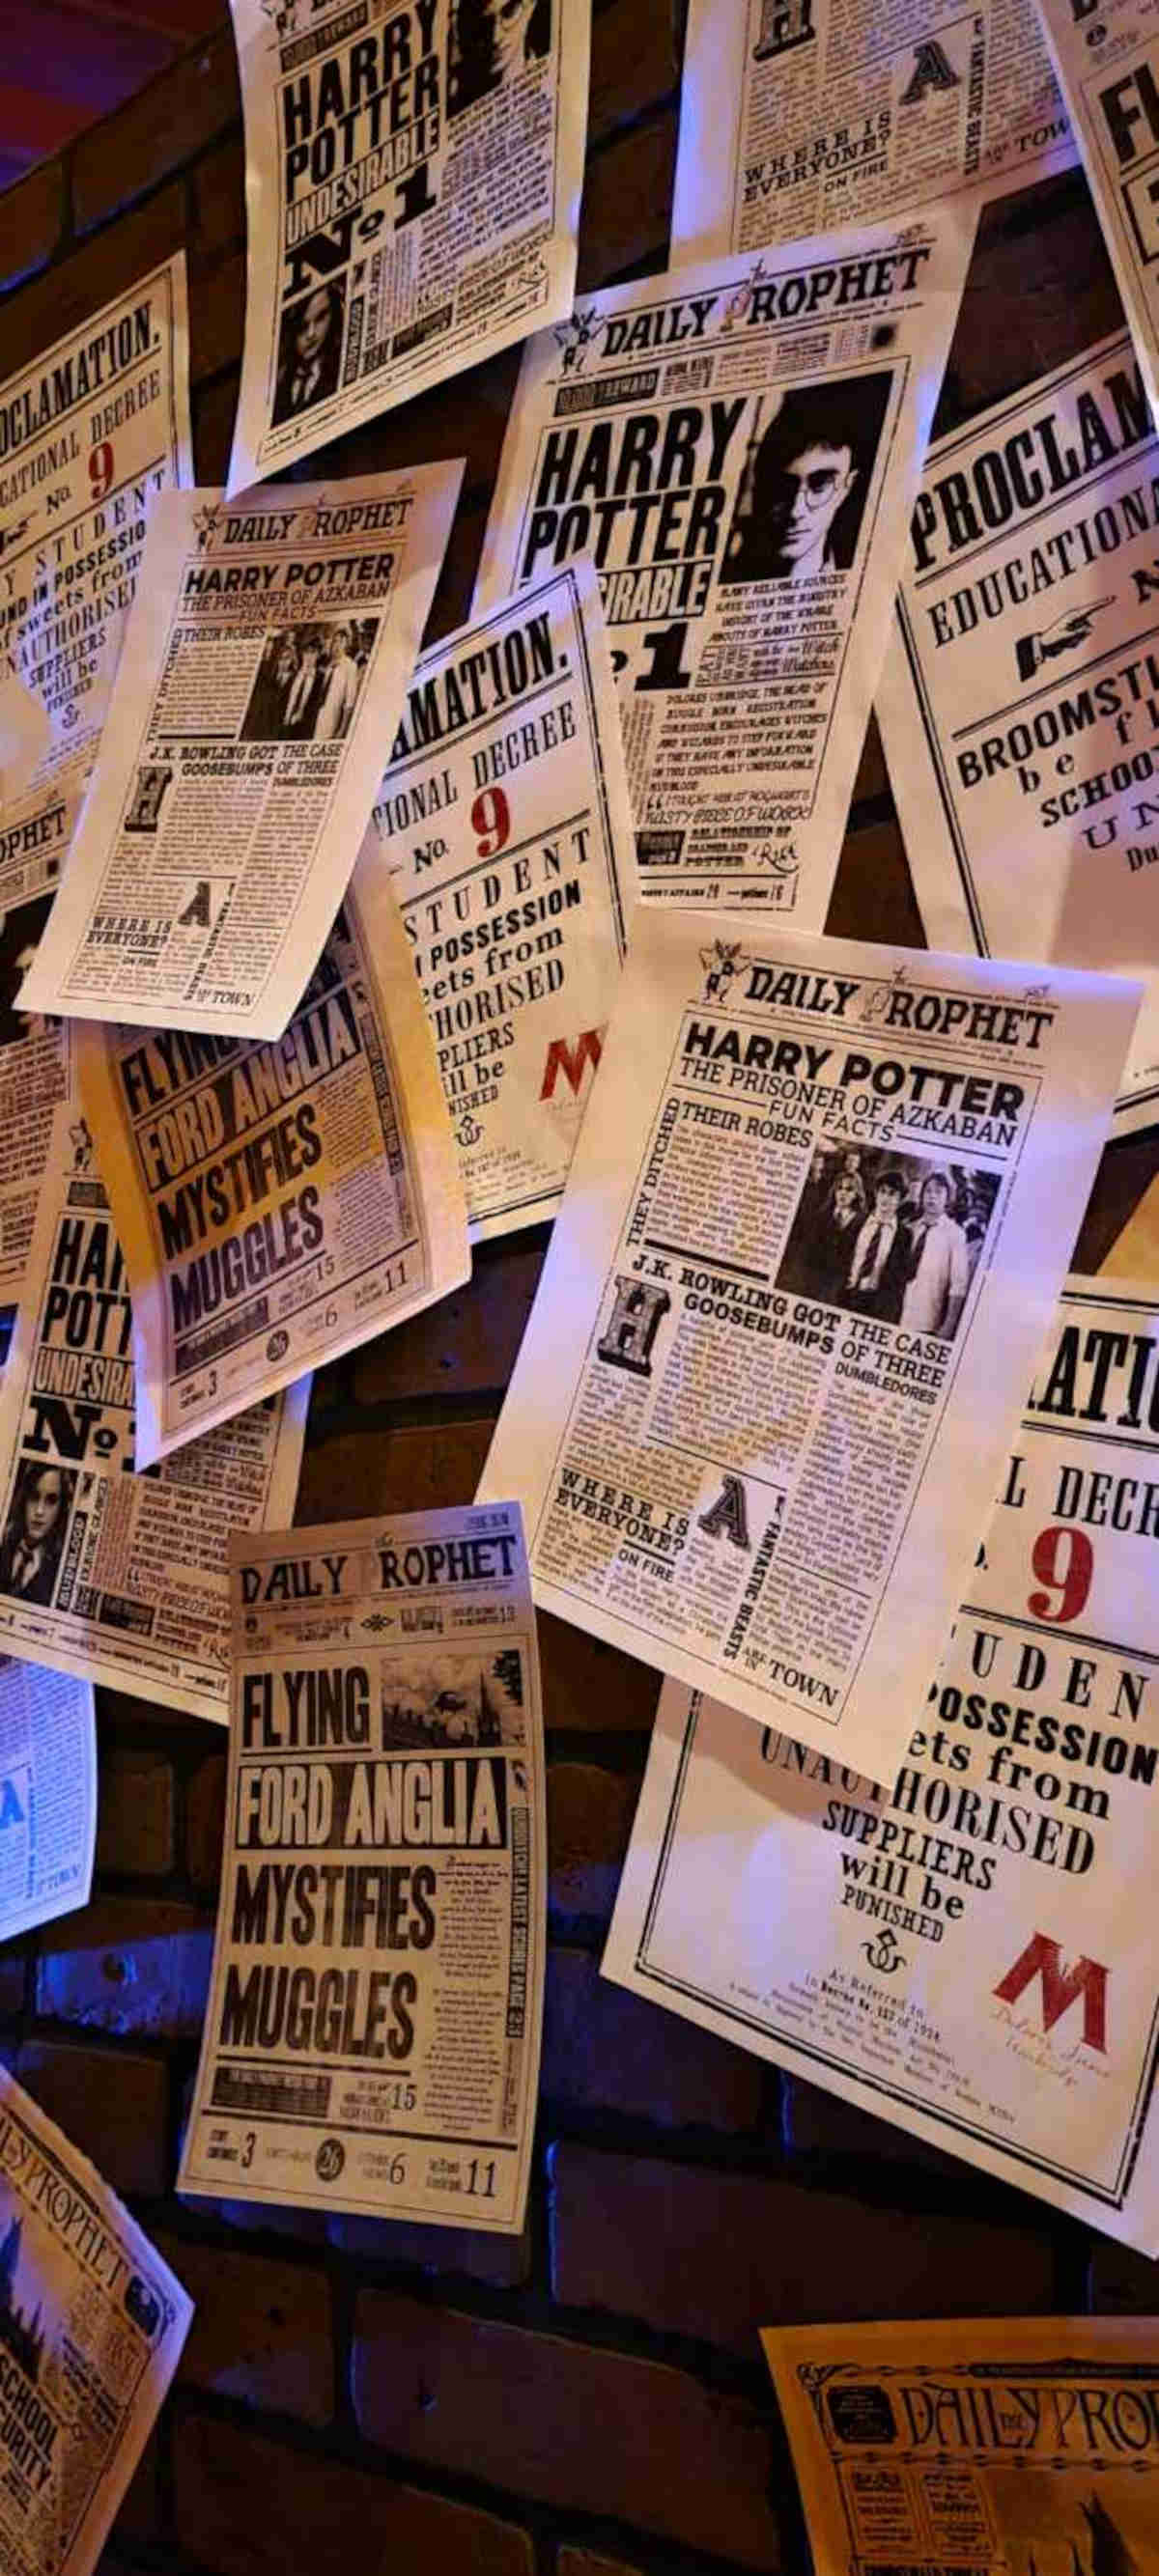 Harry Potter-themed newspaper clippings on the wall